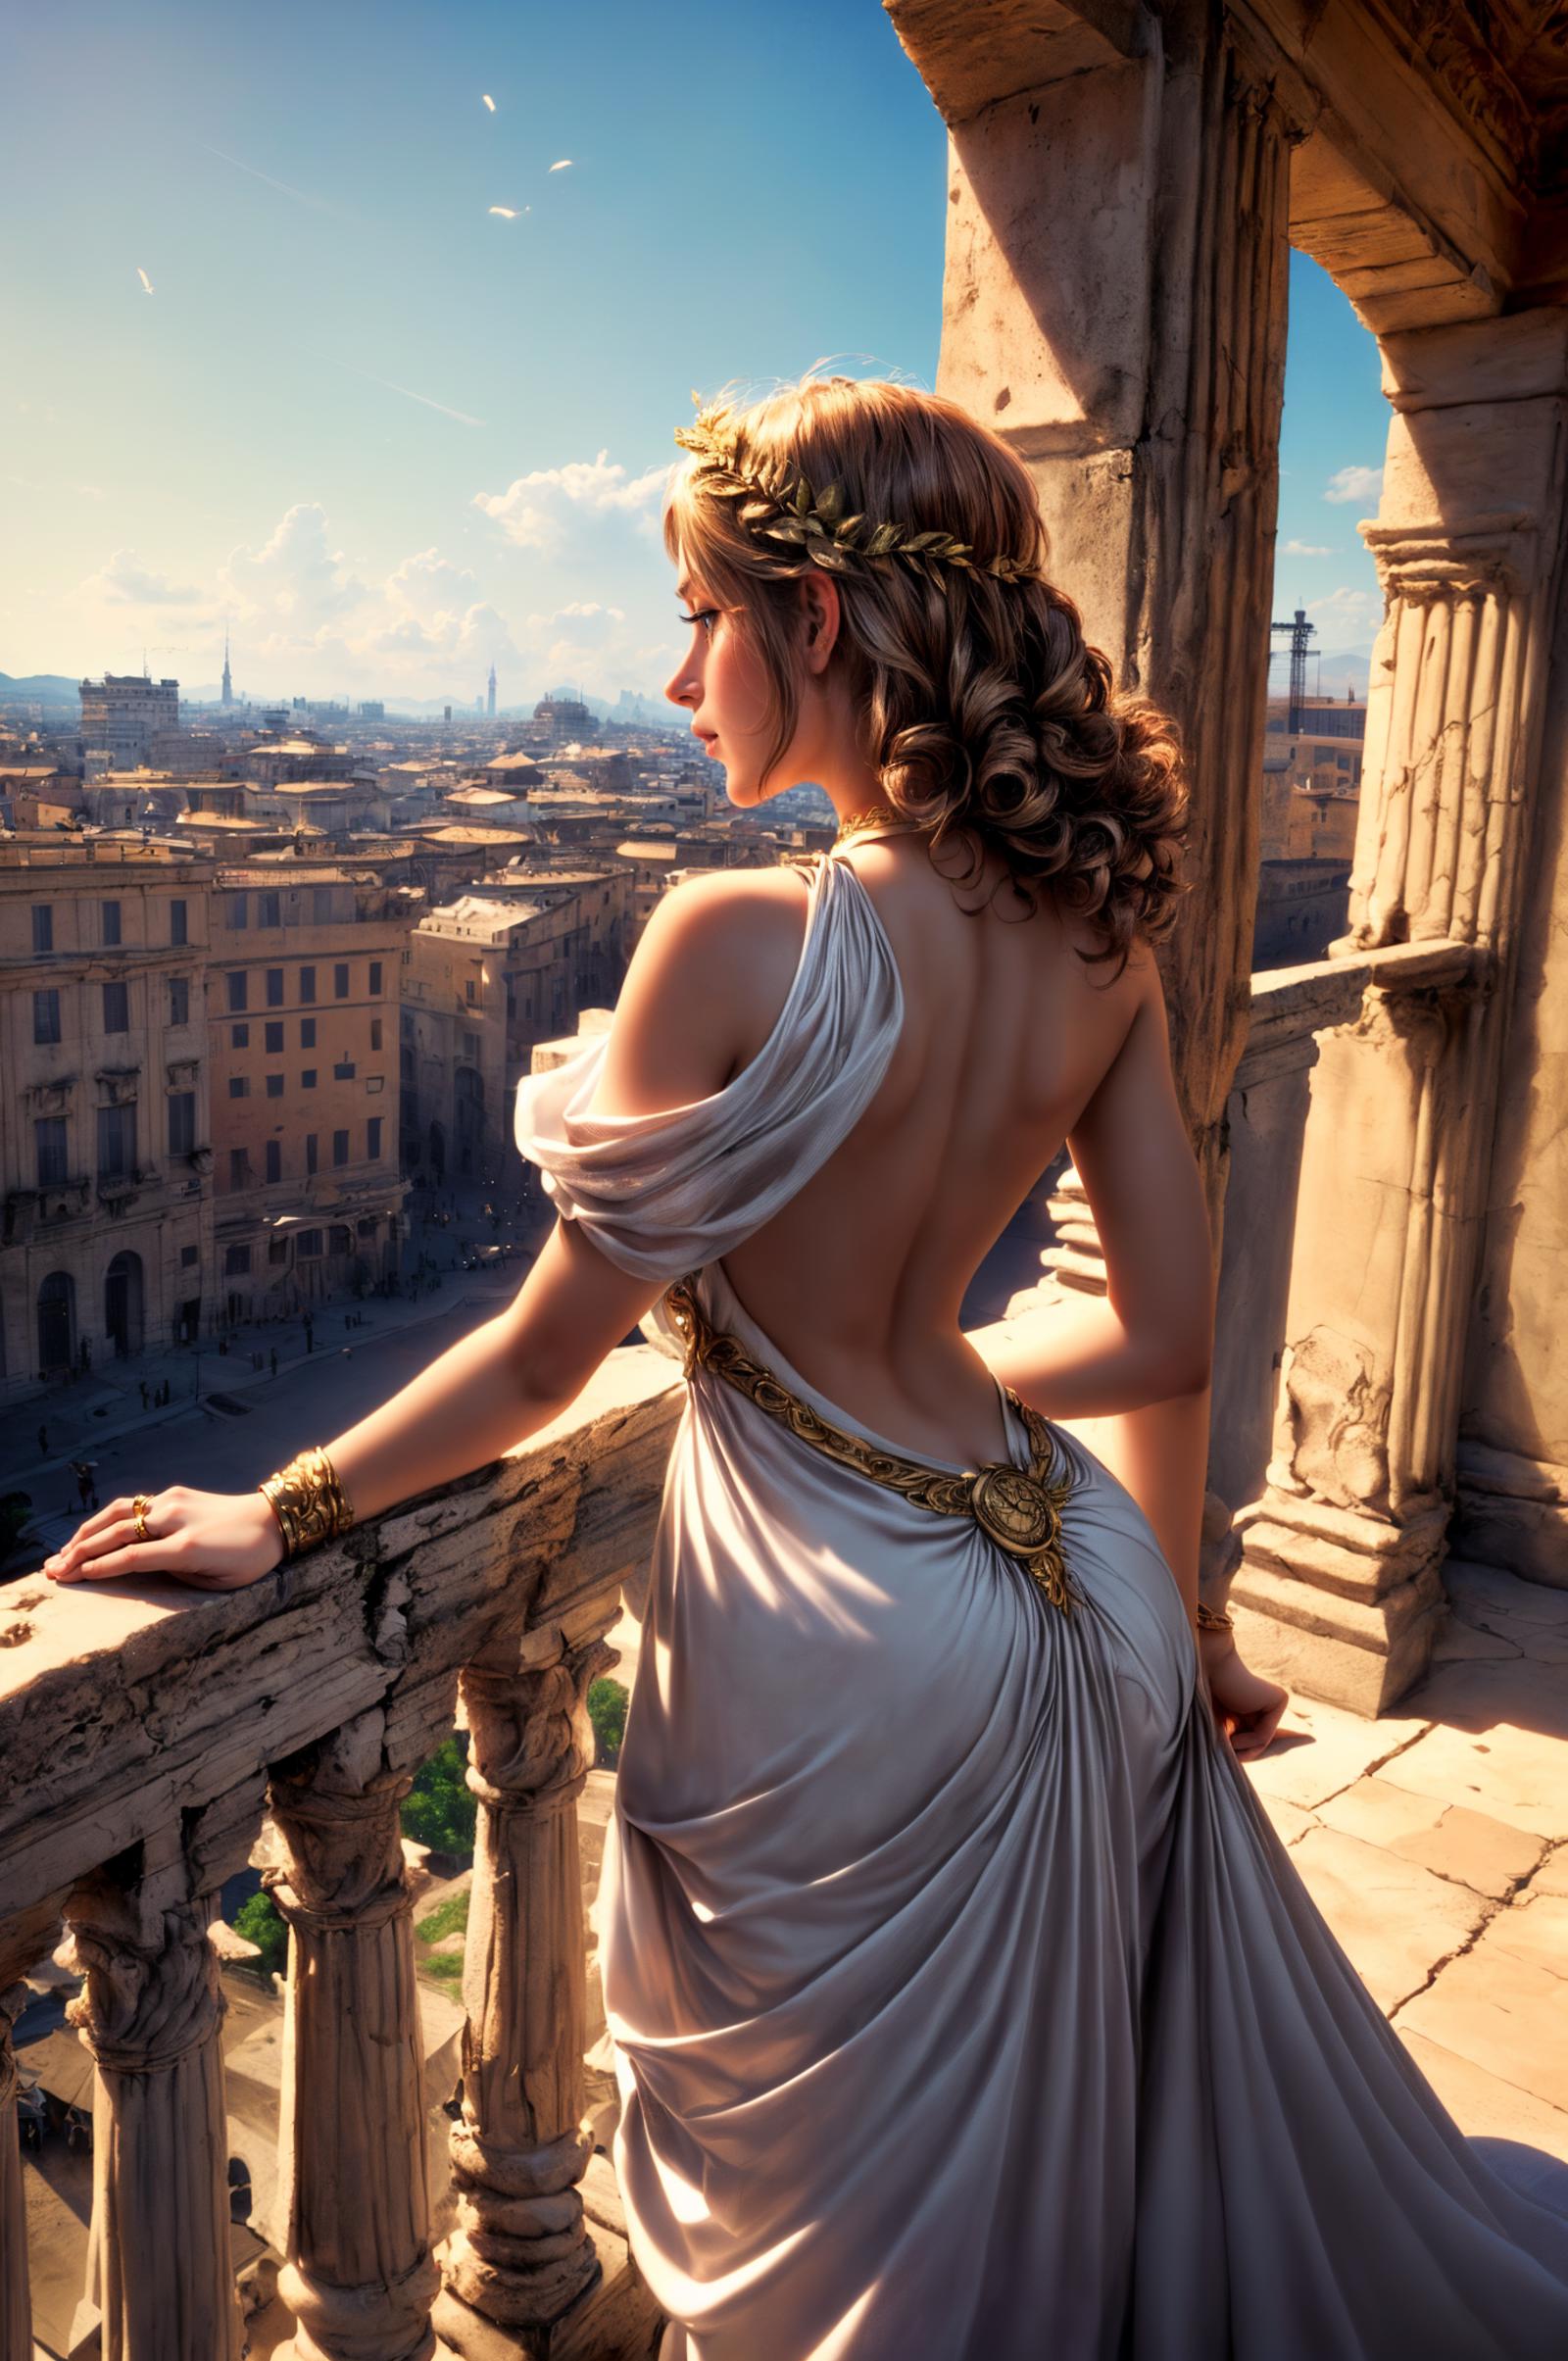 A beautiful woman in a white dress, possibly Athena, looking out over a city.